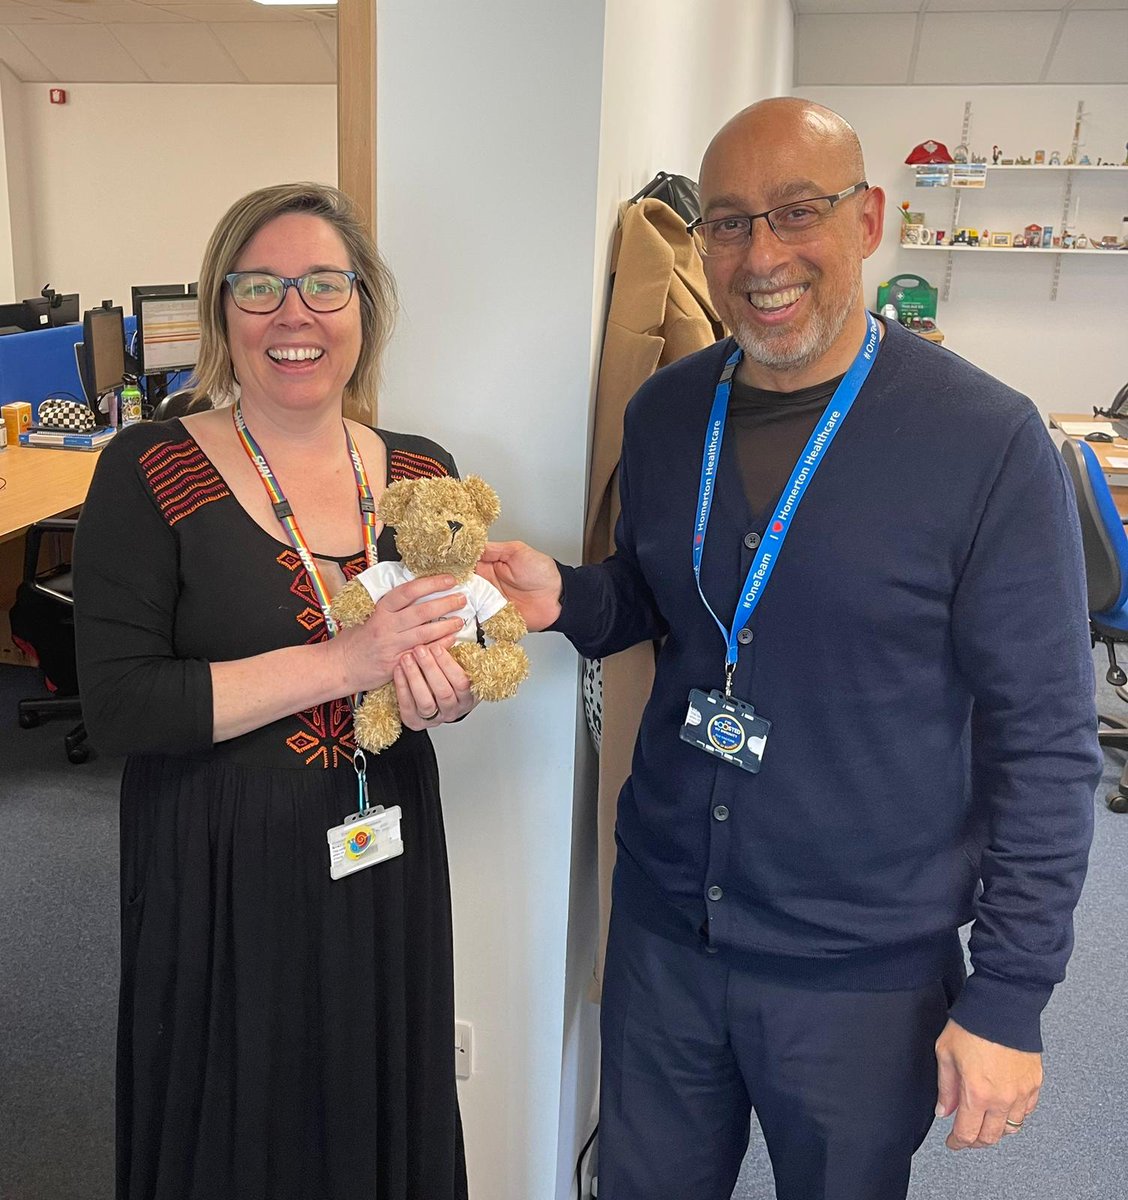 Thank you to everyone who came to talk all things PSIRF and patient safety with us @NHSHomerton this week and congratulations to Nicola one of our amazing @EDHomerton consultants who won the quiz and is now a proud owner of a highly prized and very rare Datix bear! 😂🐻🙌🏼